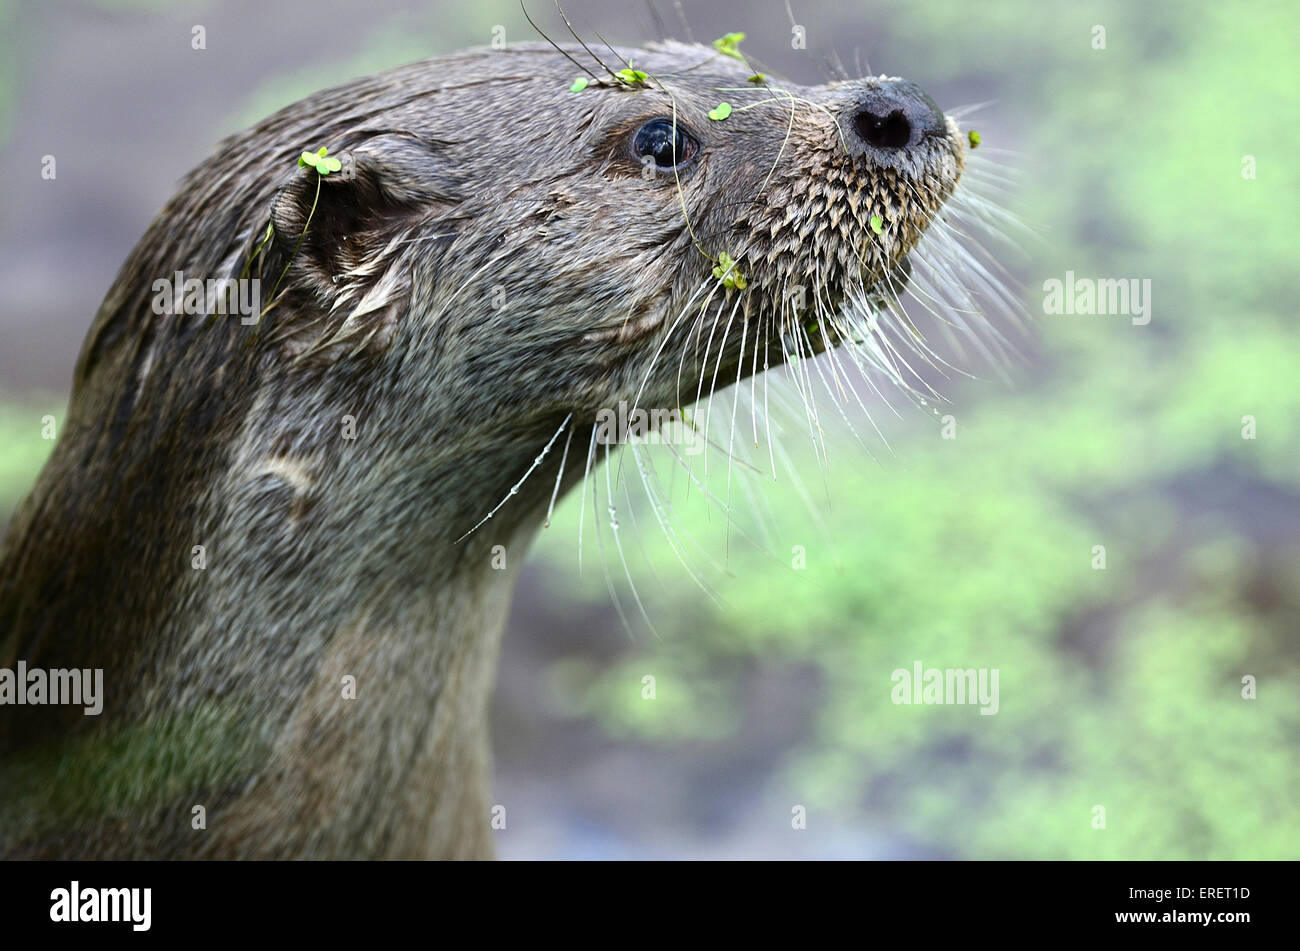 Otter's face showing its whiskers UK Stock Photo